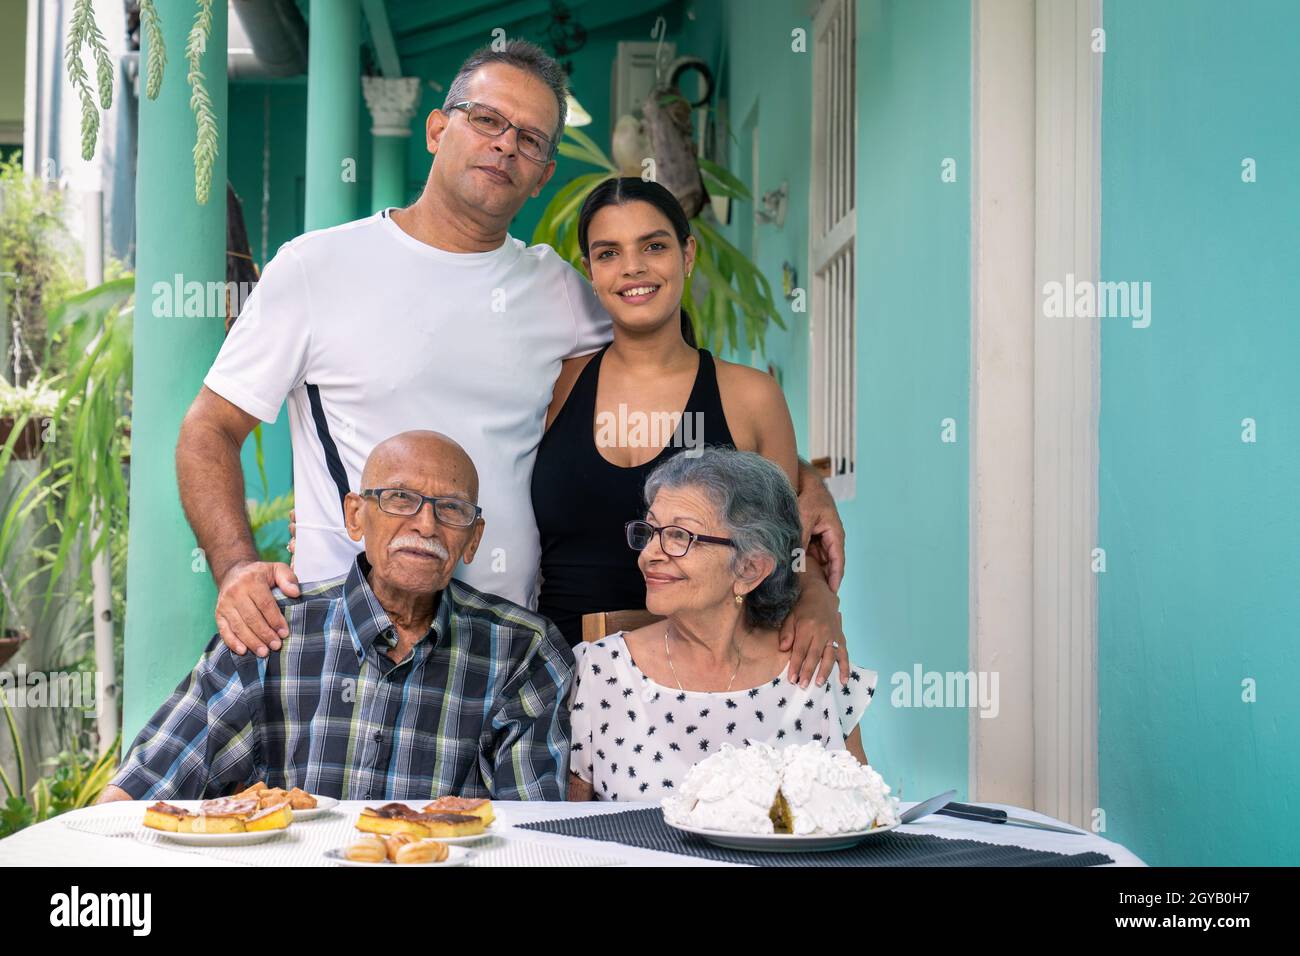 Elderly couple wearing eyeglasses sitting at a table and a man and a young woman standing behind the elderly Stock Photo